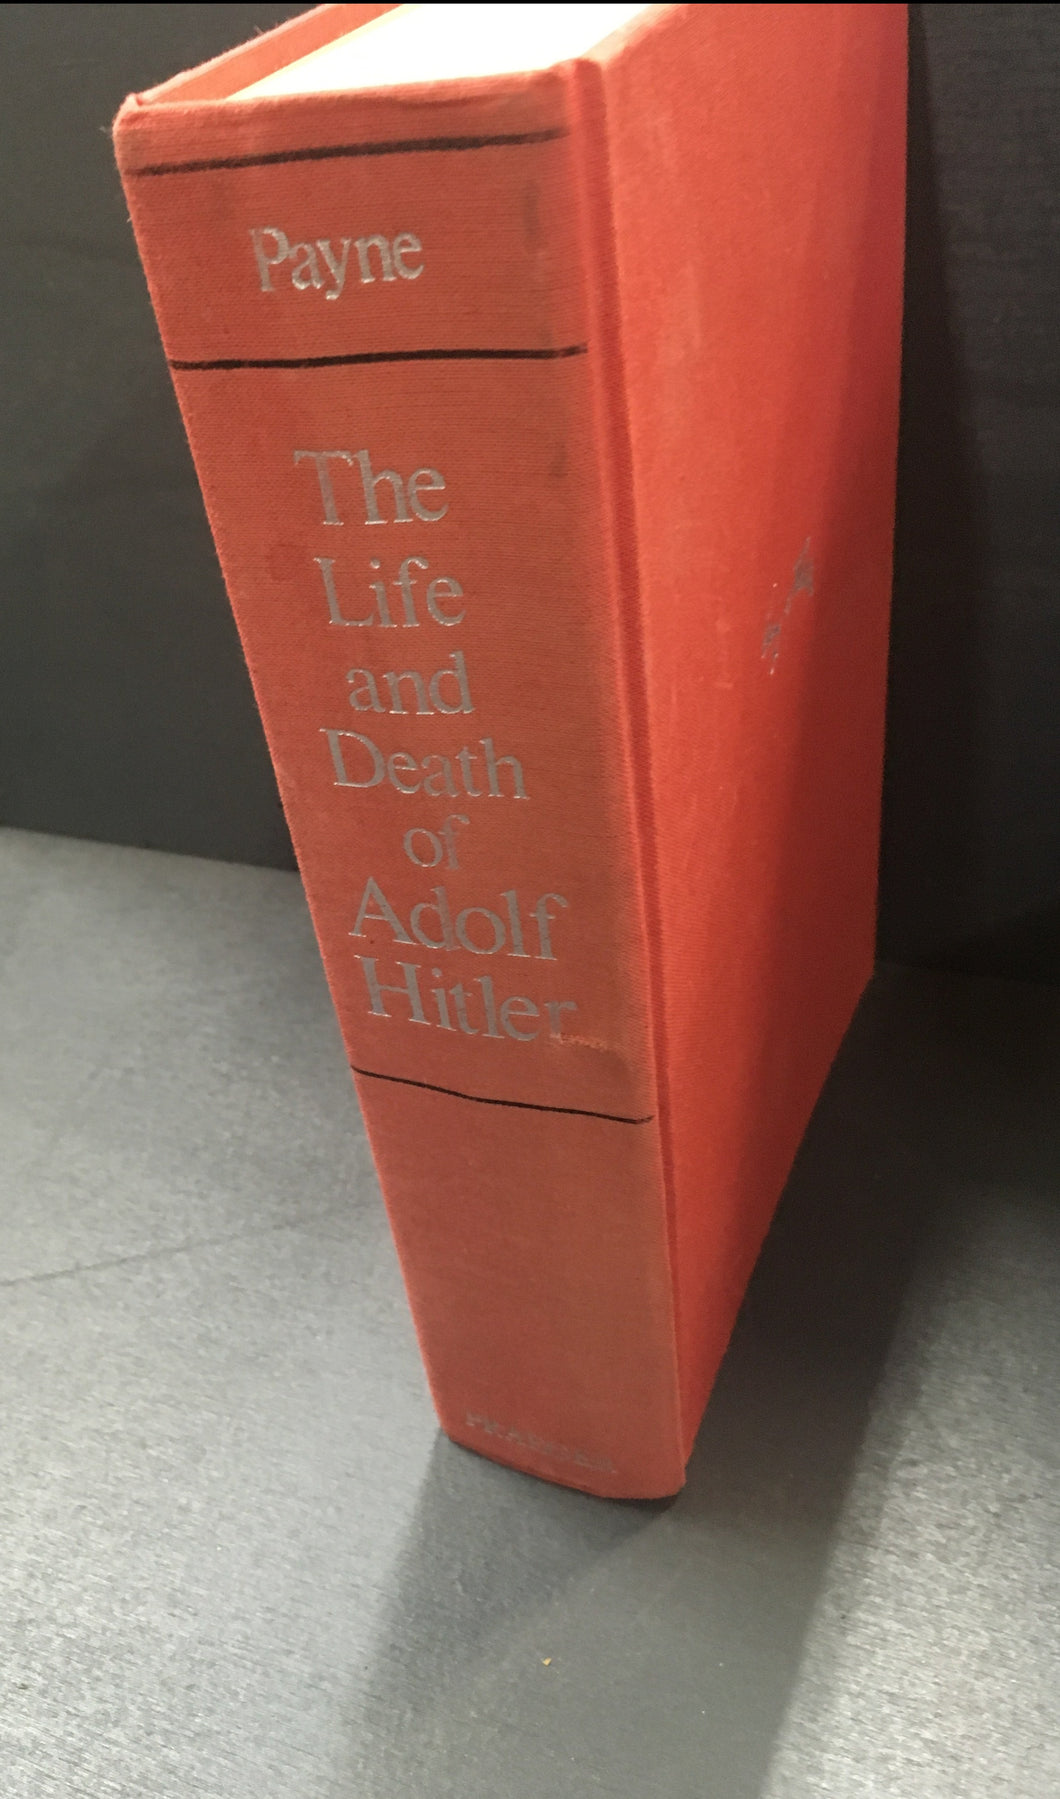 1973 “Life and Death of Adolf Hitler” Book by Robert Payne ~Signed Copy